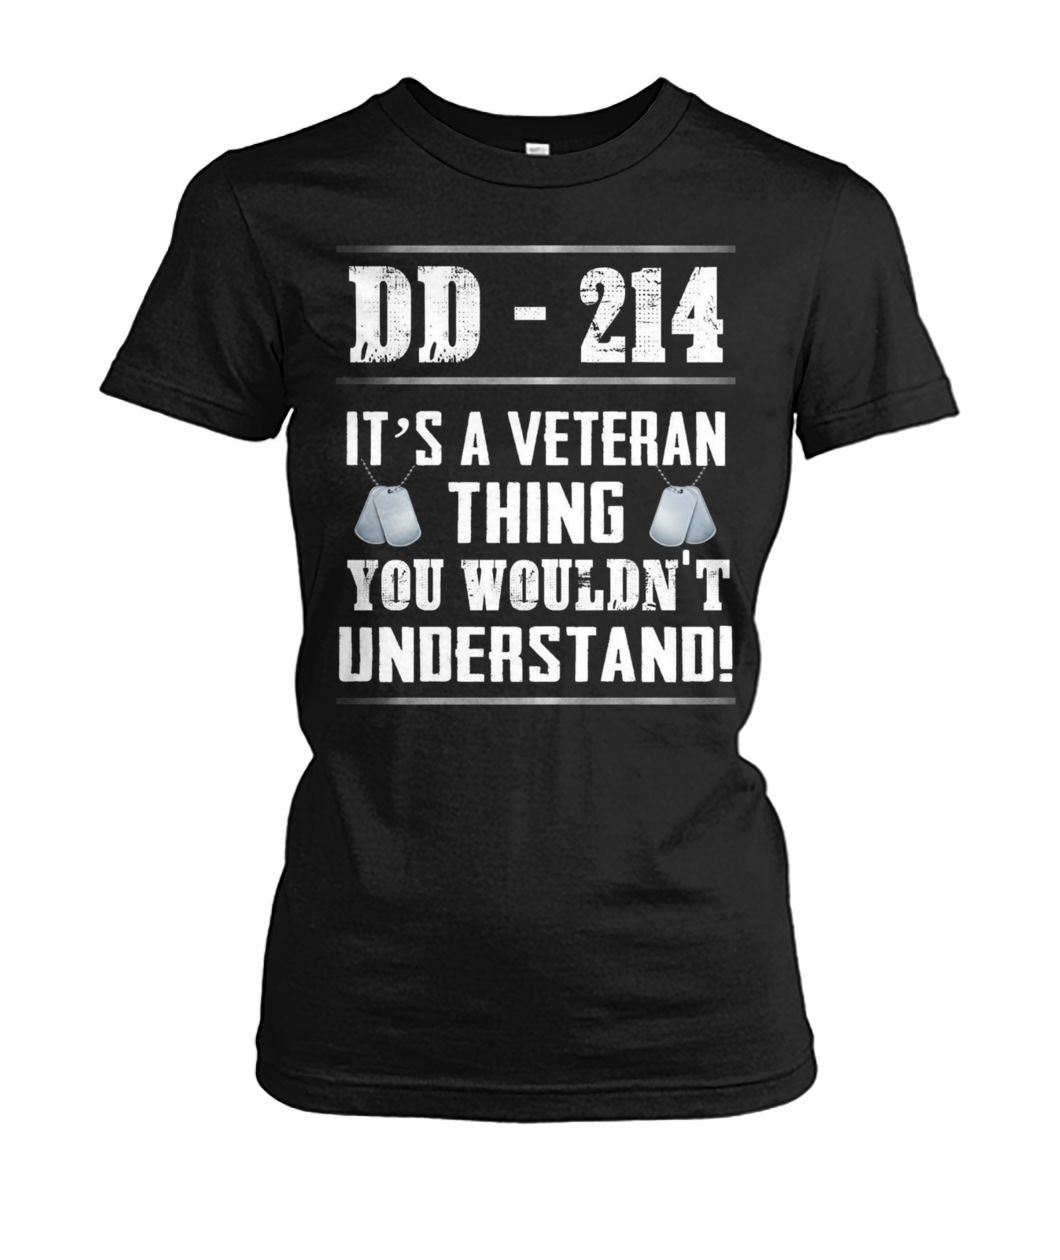 DD-214 it's a veteran thing you wouldn't understand women's crew tee